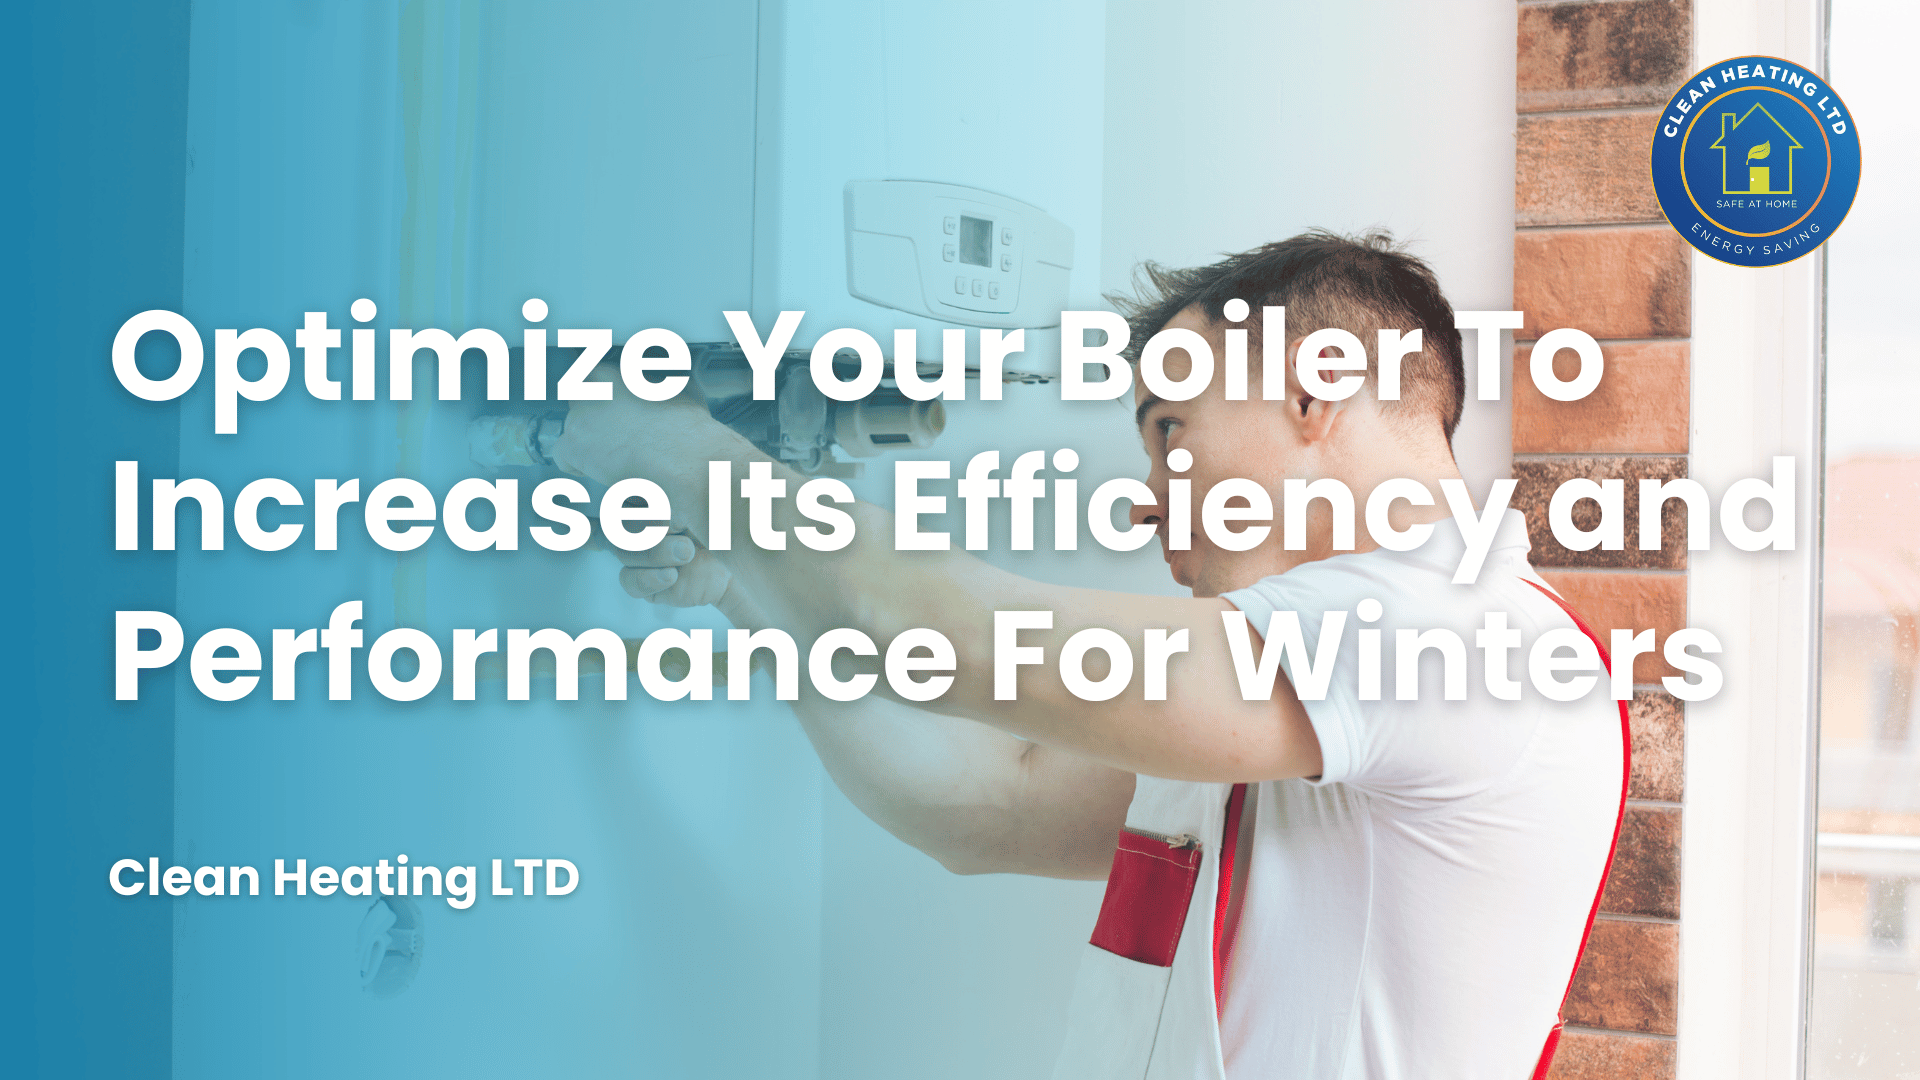 Optimize Your Boiler To Increase Its Efficiency and Performance For Winters